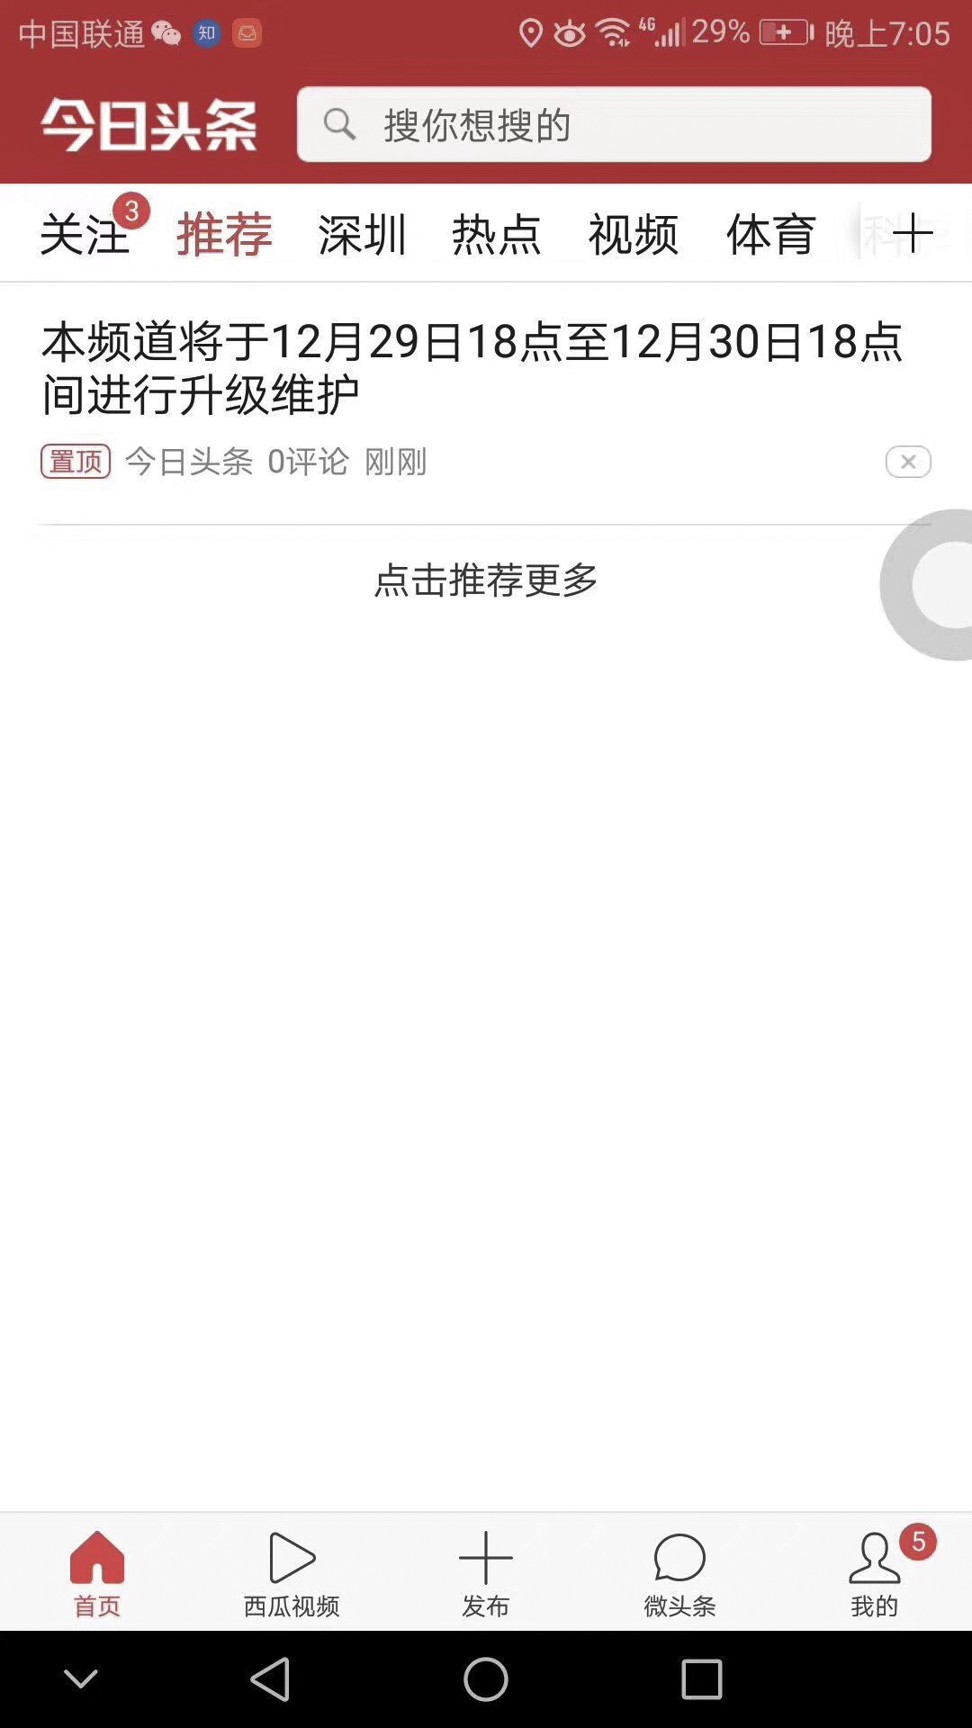 Popular news app Toutiao notifies users that it will be offline for 24 hours. Photo: Handout